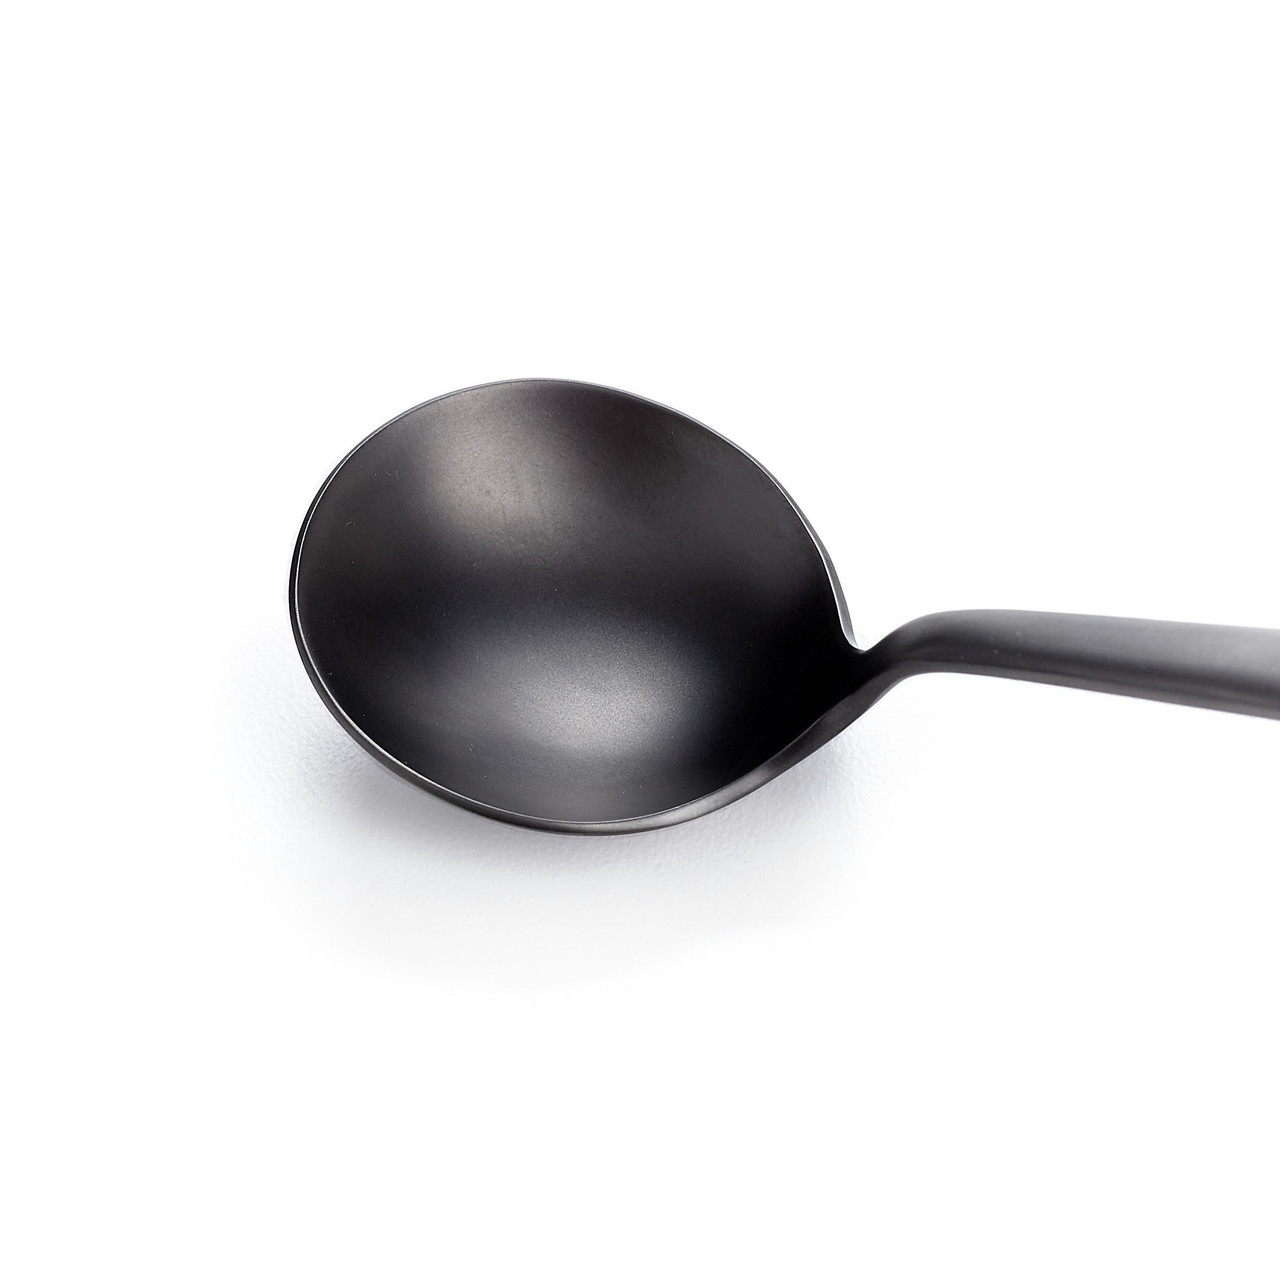 Coffee cupping spoon, Stainless Steel